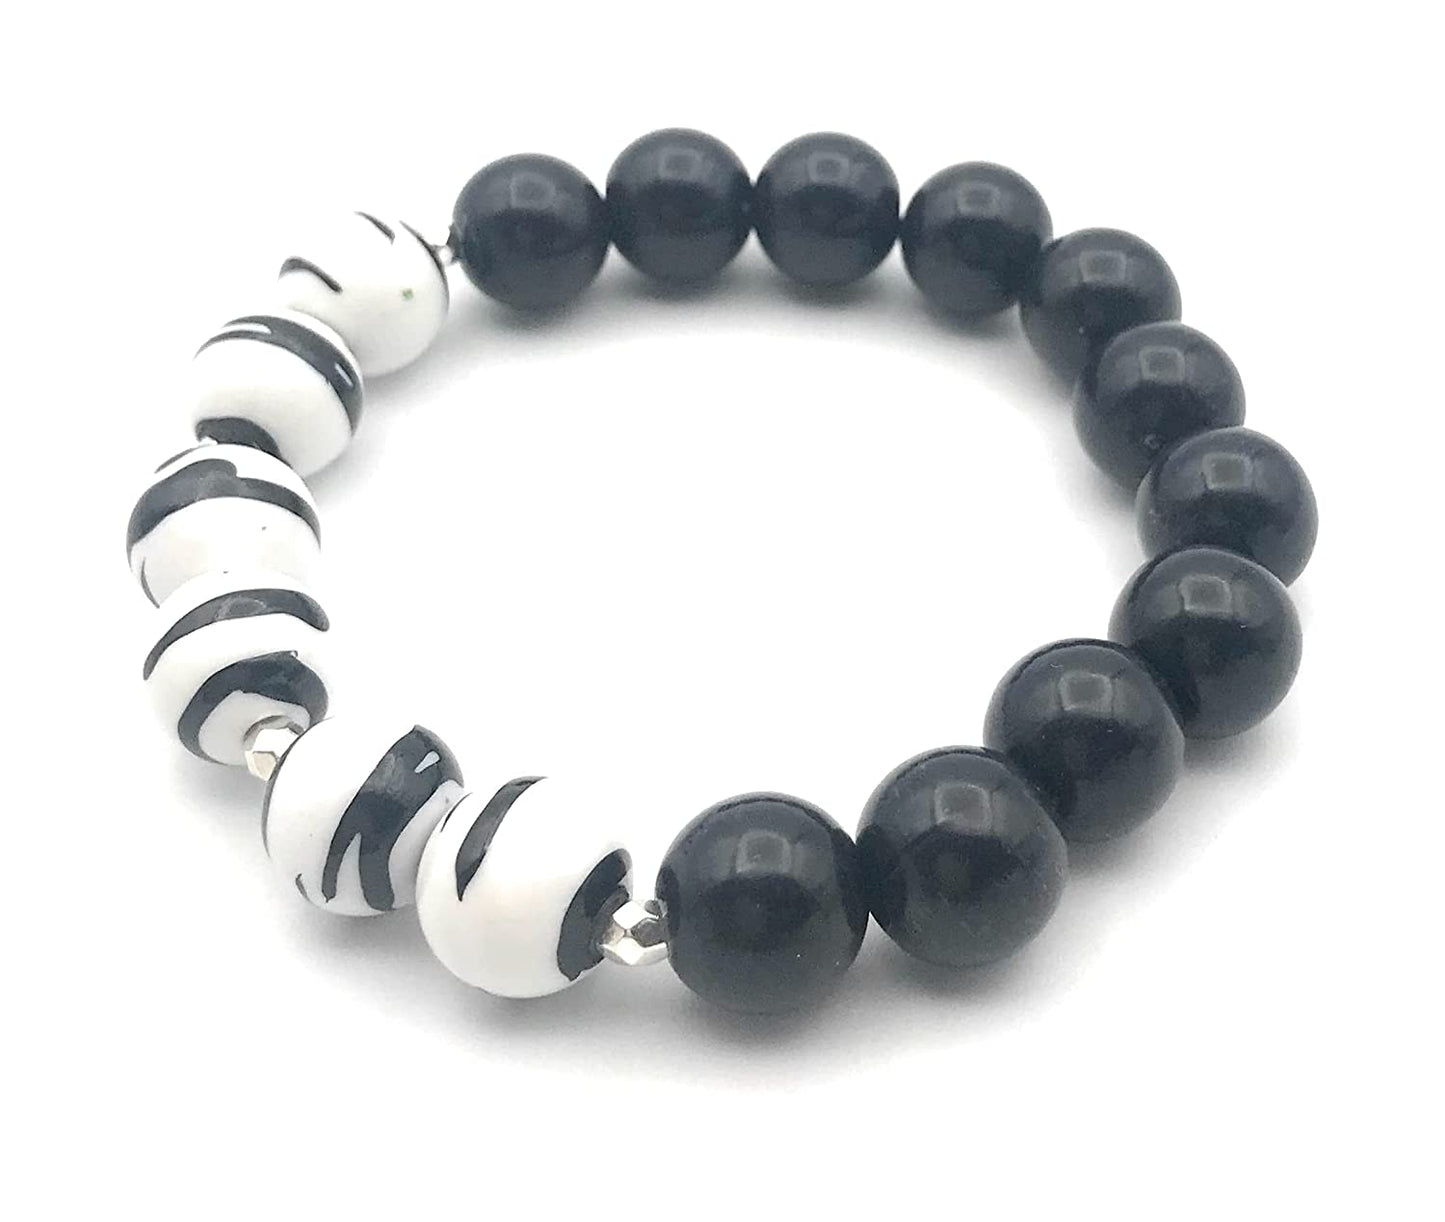 White and Black Beaded Stretch Bracelet from Scott D Jewelry Designs